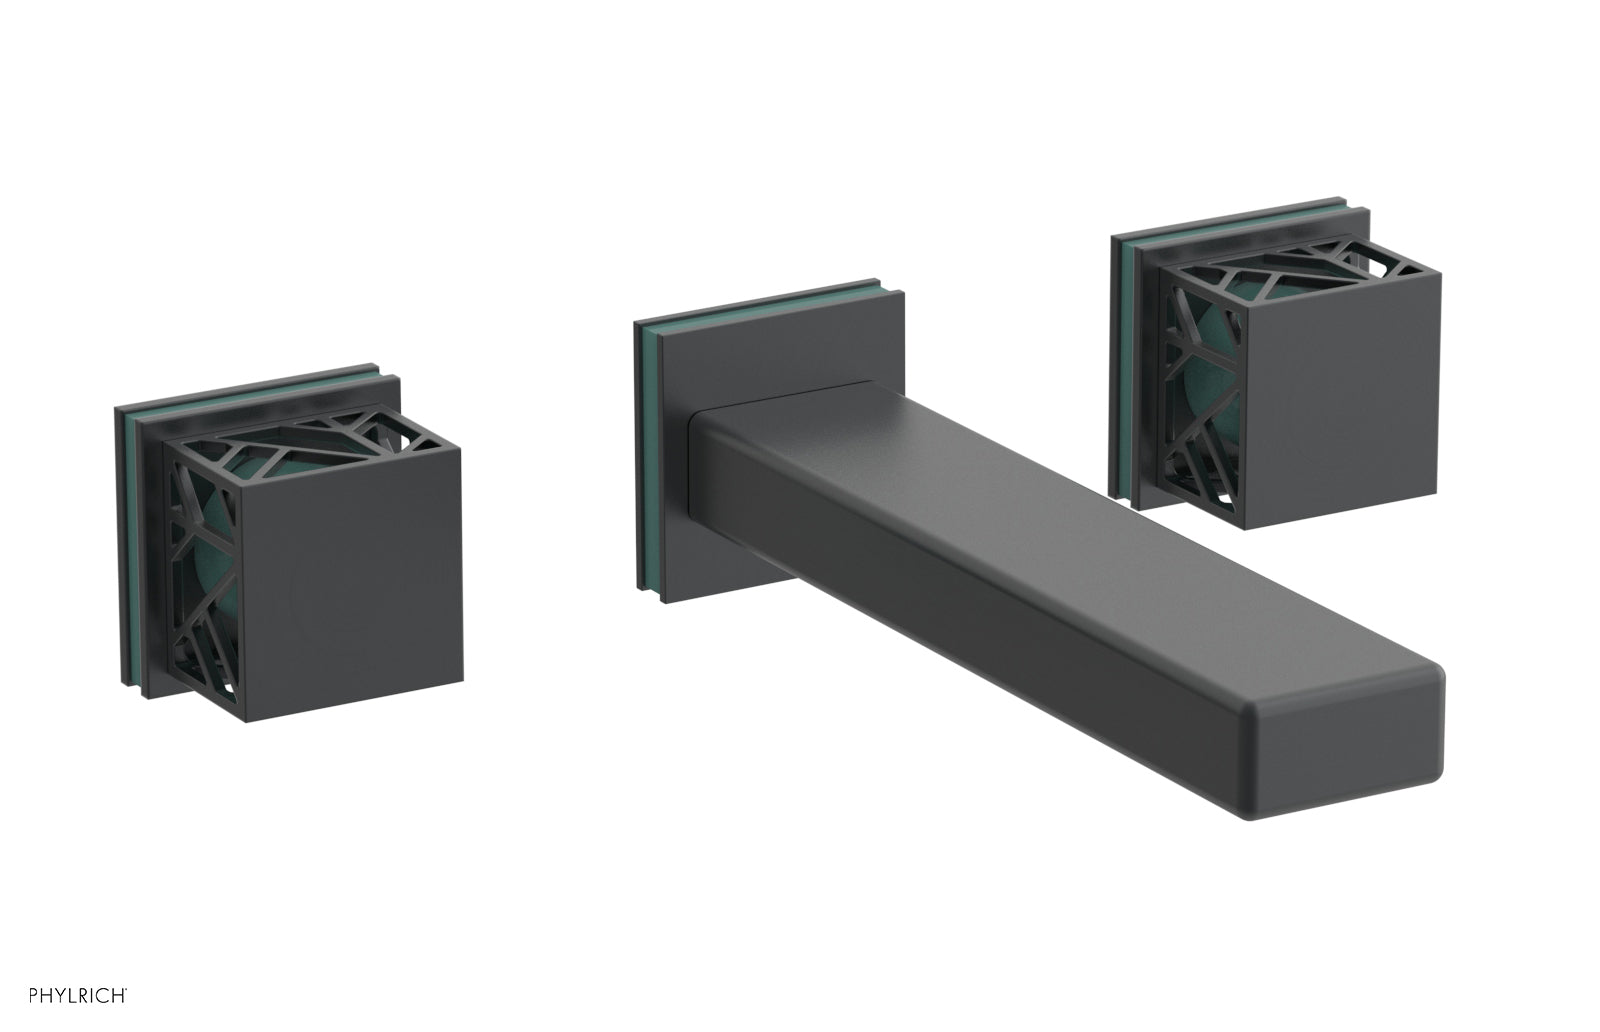 Phylrich JOLIE Wall Lavatory Set - Square Handles with "Turquoise" Accents